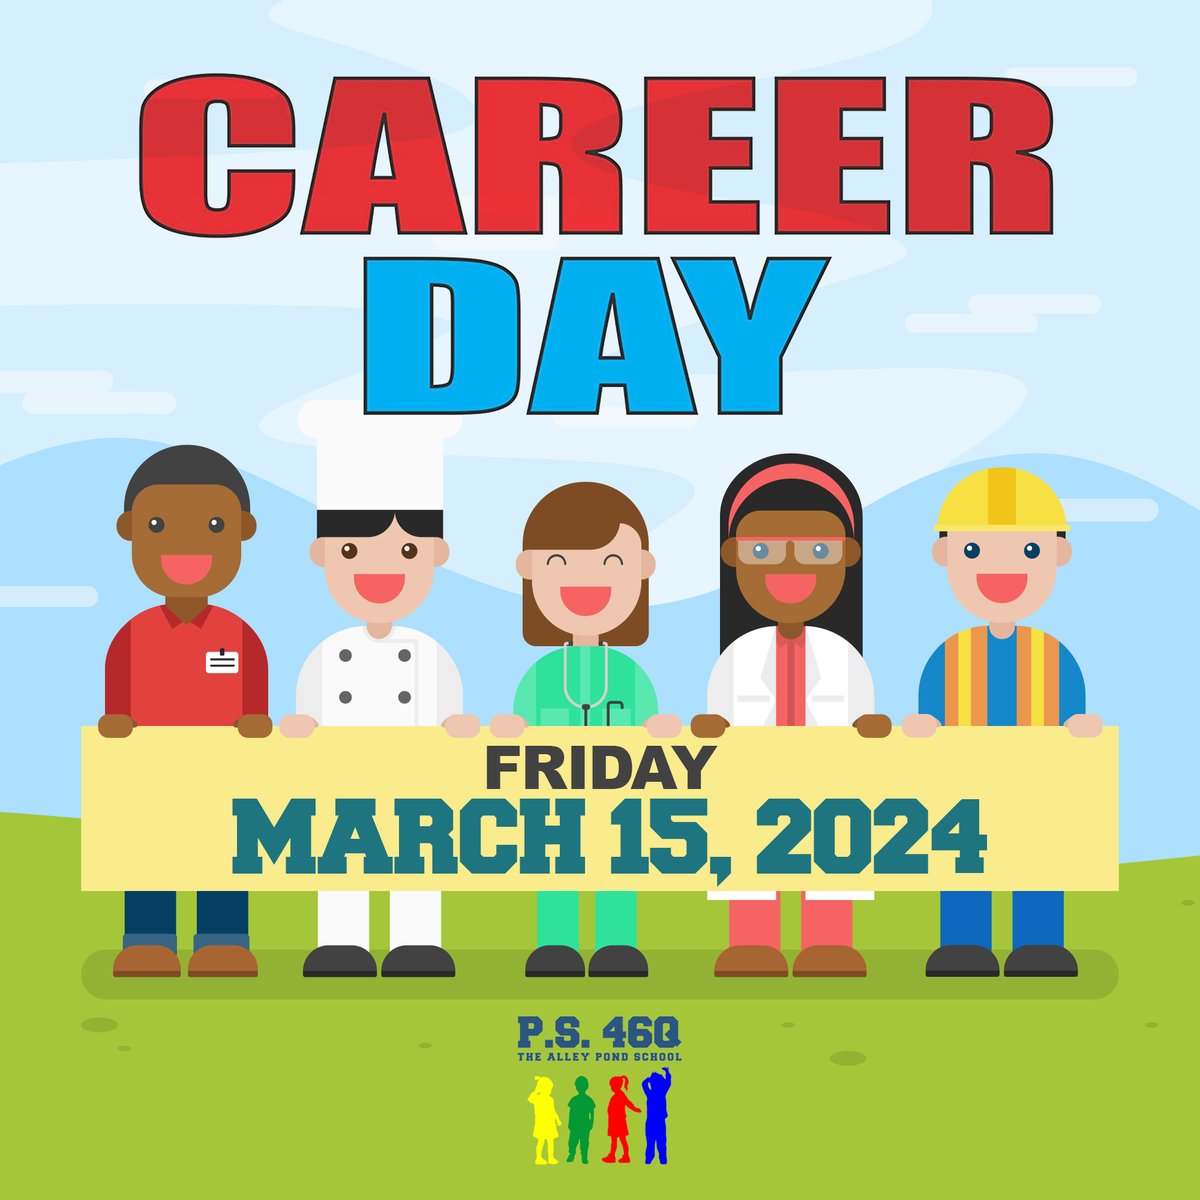 College and Career Week continues at P.S. 46Q! Dress for your future career tomorrow!